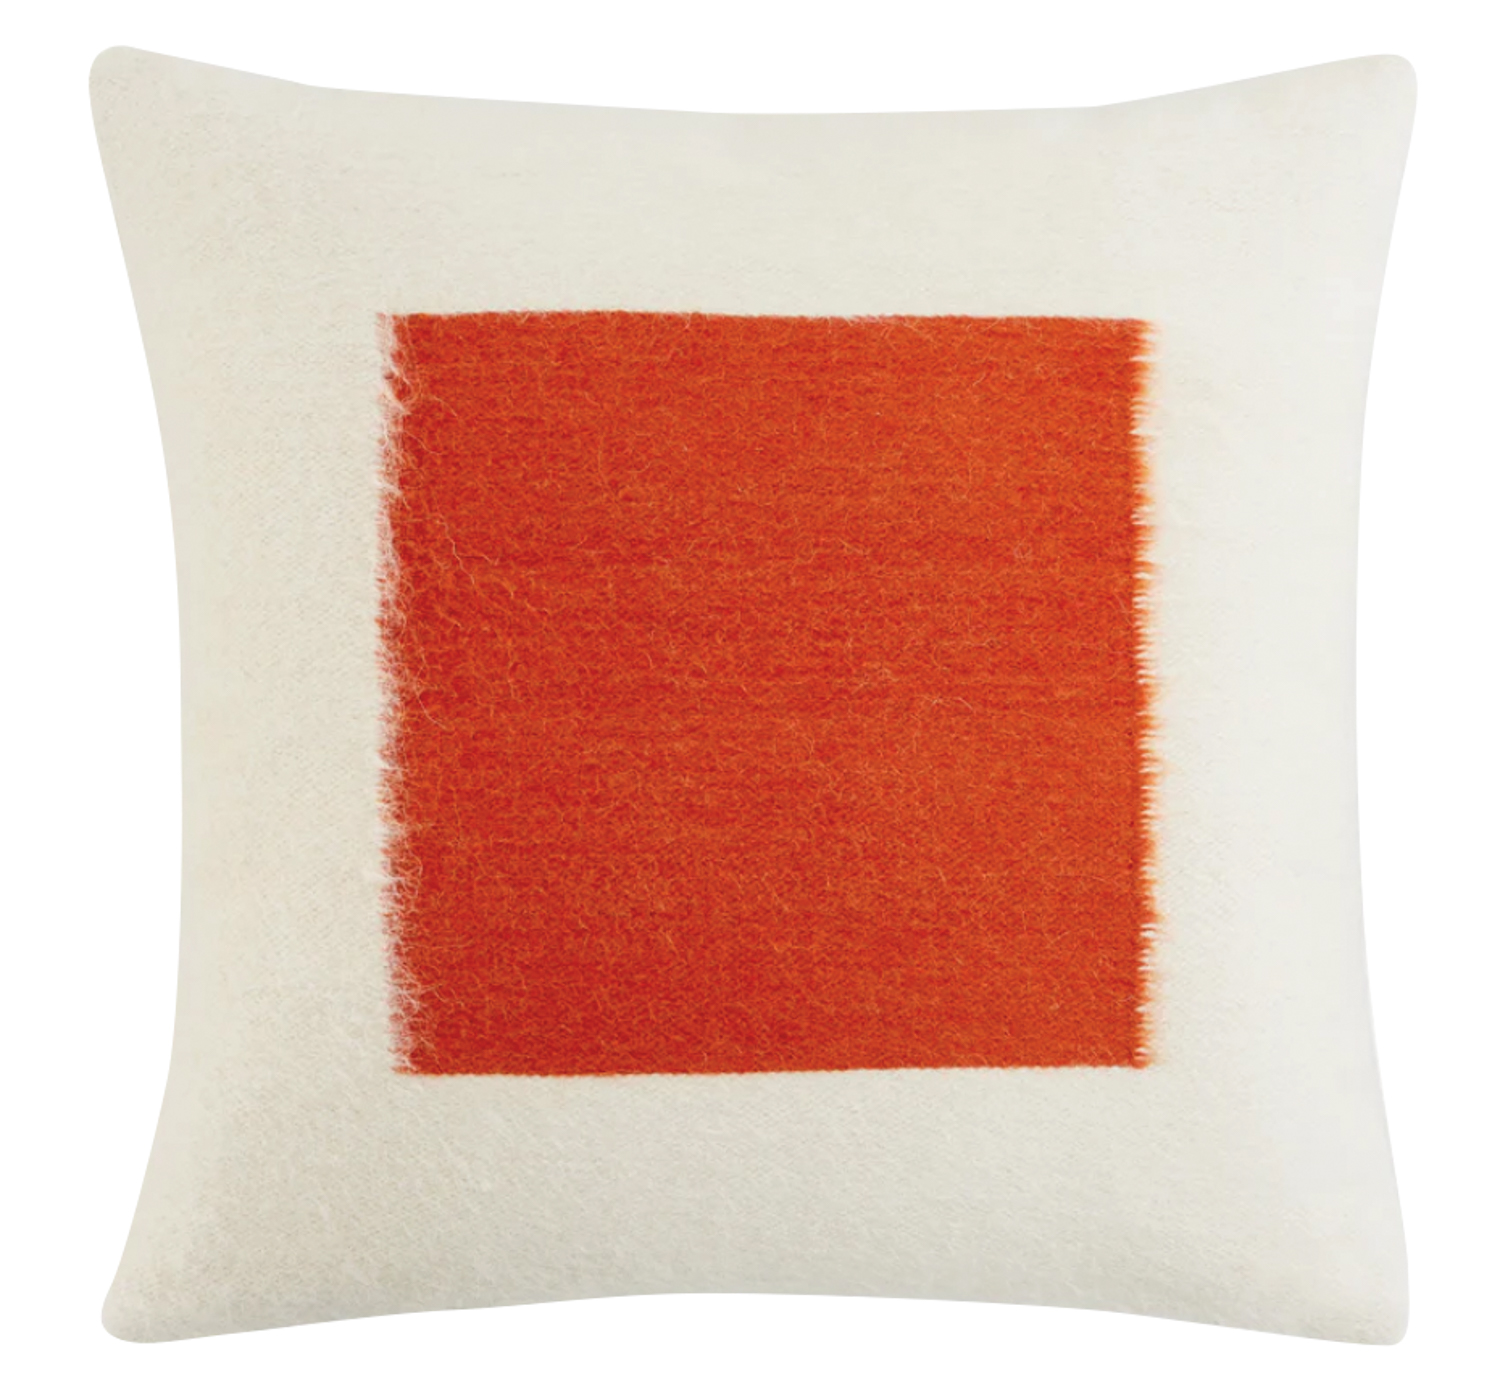 white pillow with red square